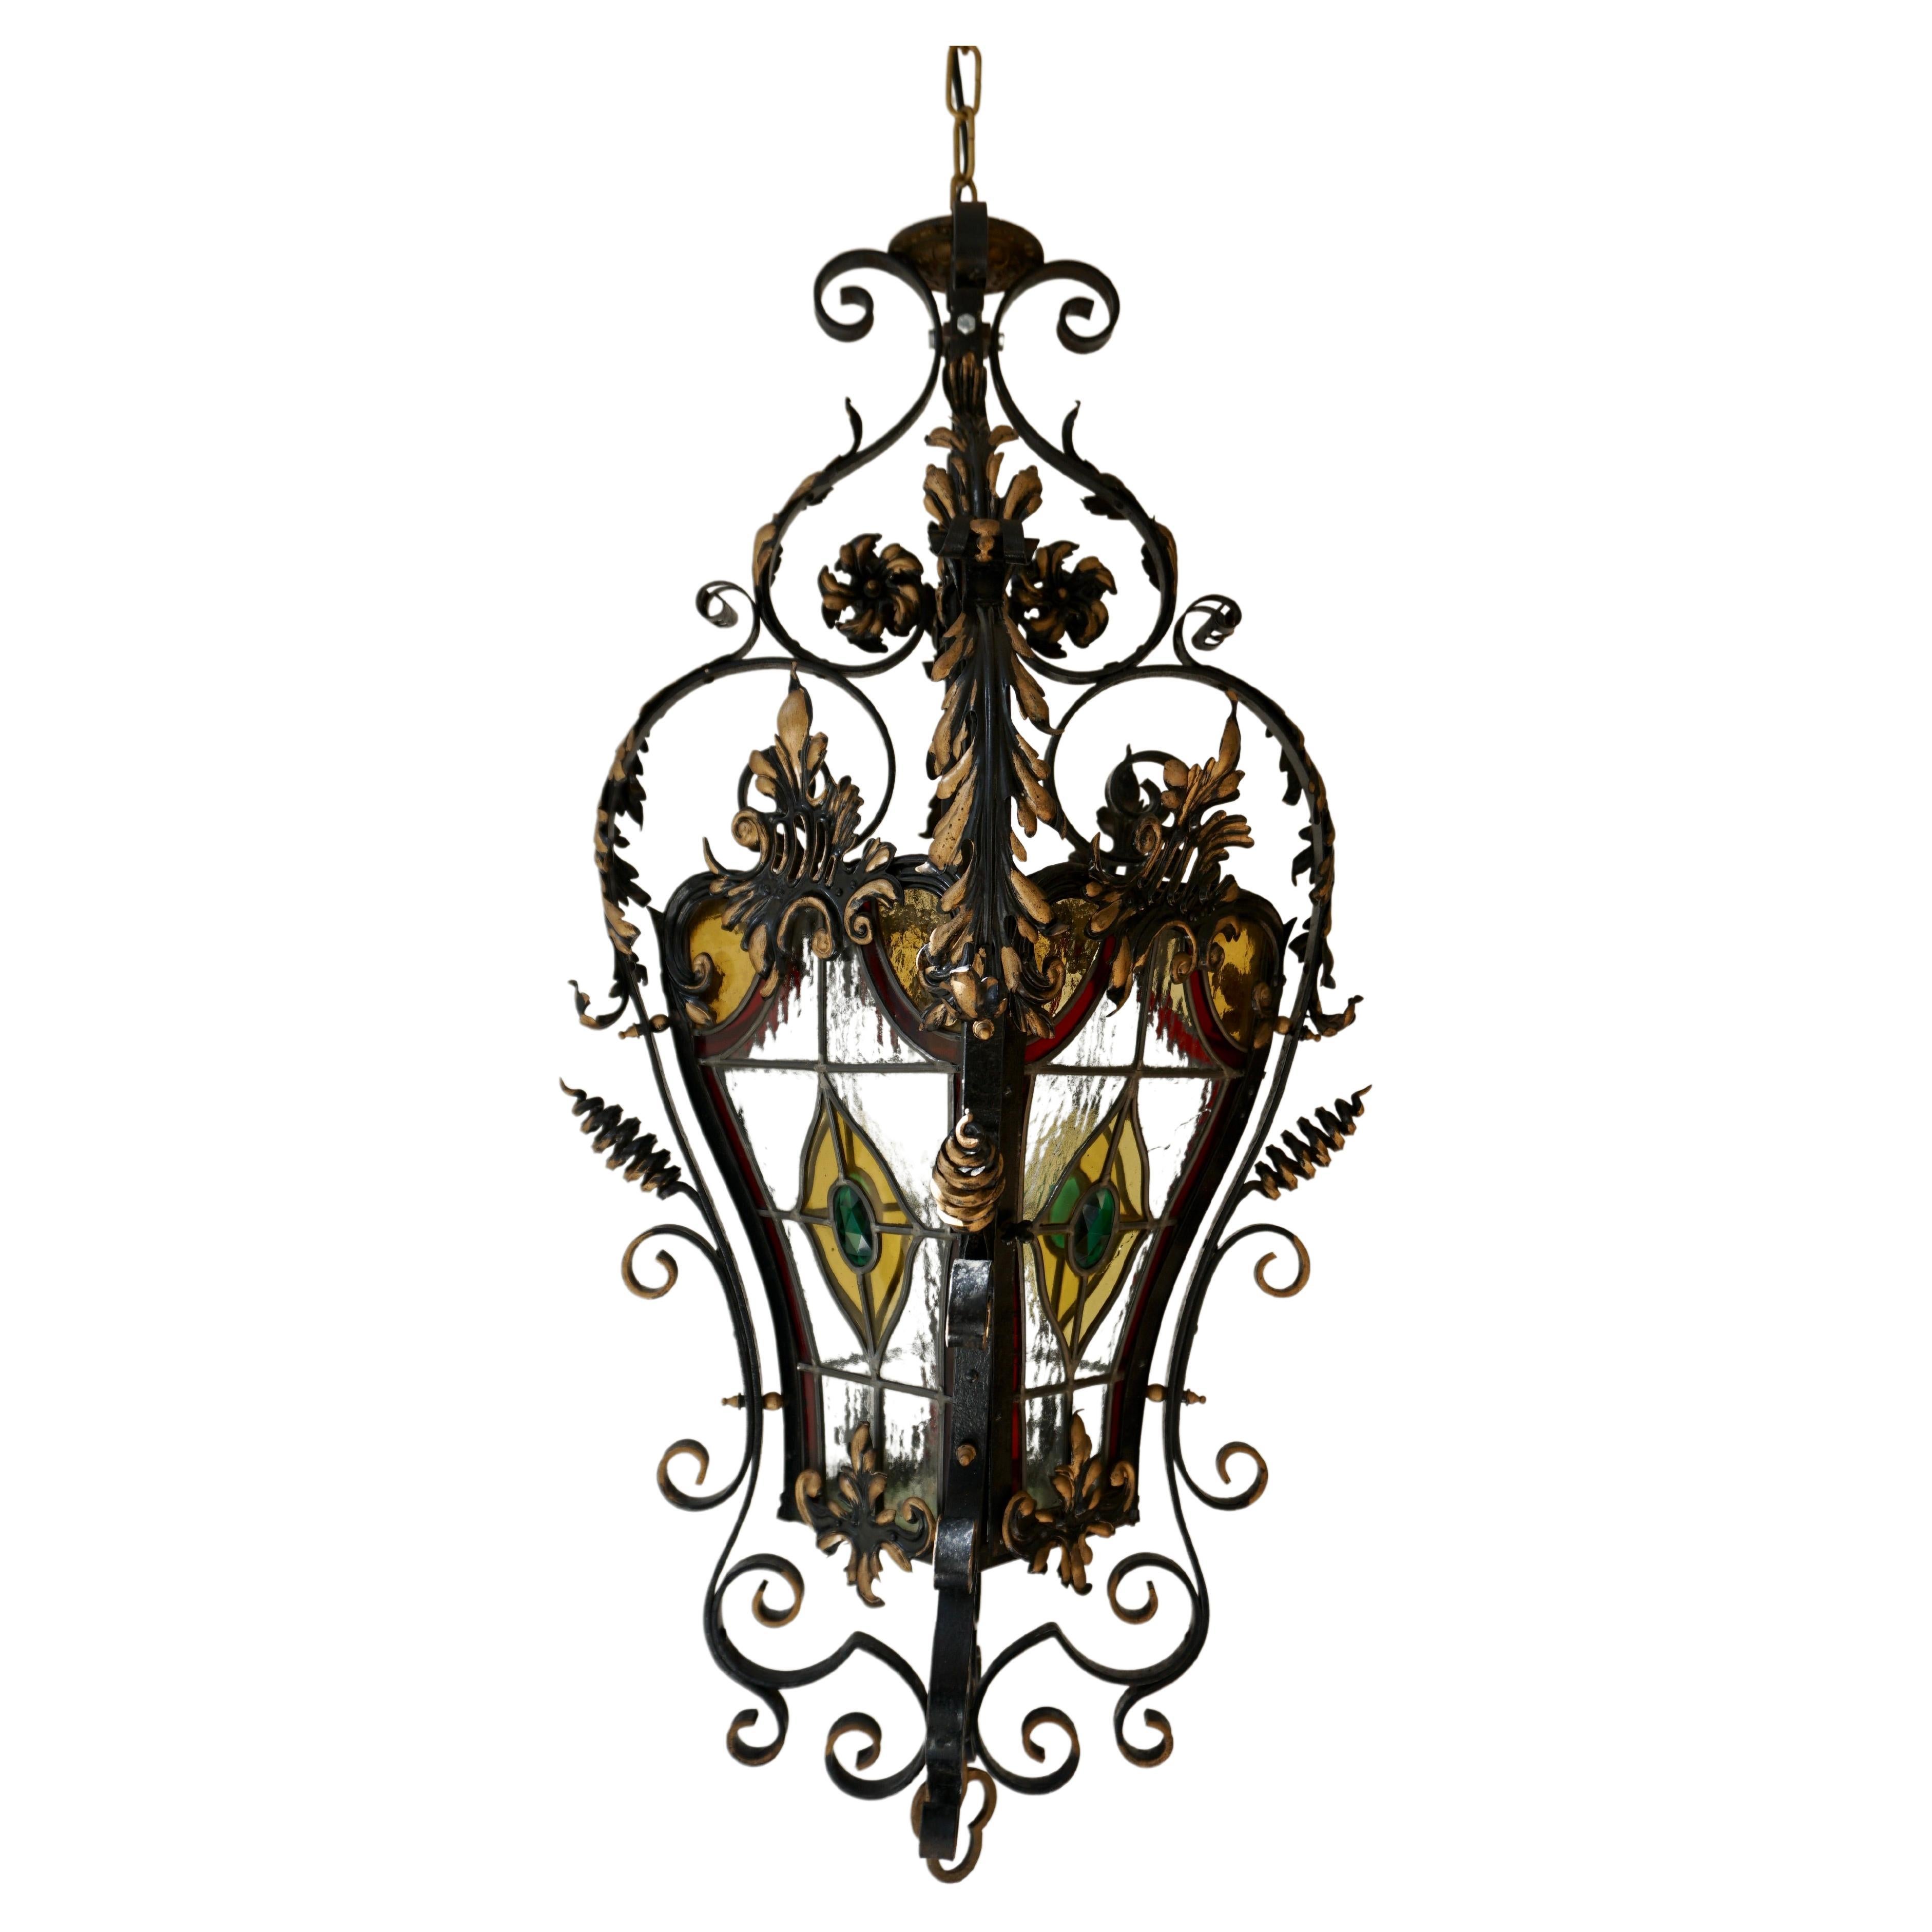  Italian Scrolled Wrought Iron and Stained Glass Hanging Hall Lantern, C. 1900 For Sale